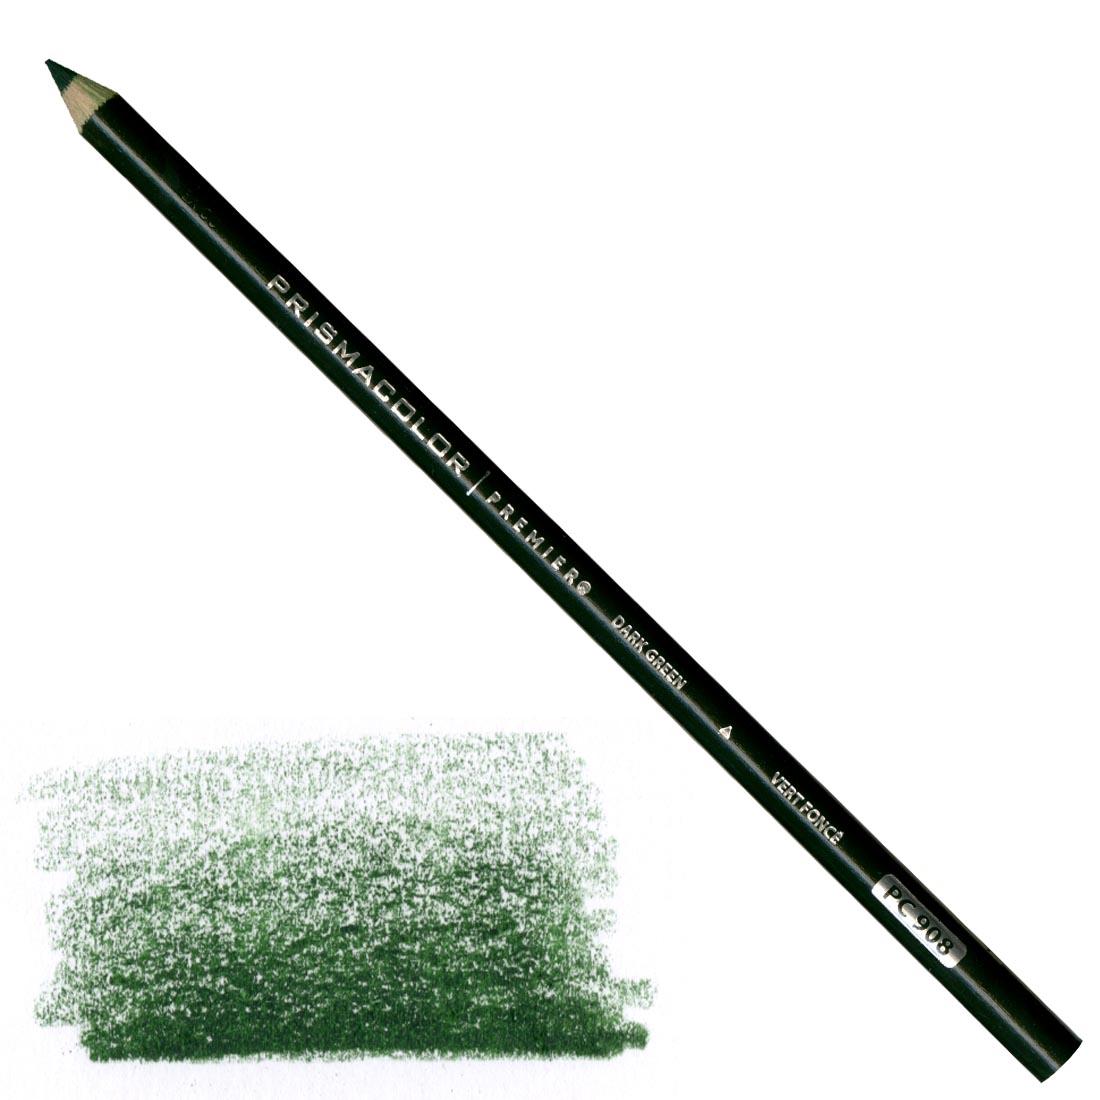 Dark Green Prismacolor Premier Colored Pencil with a sample colored swatch